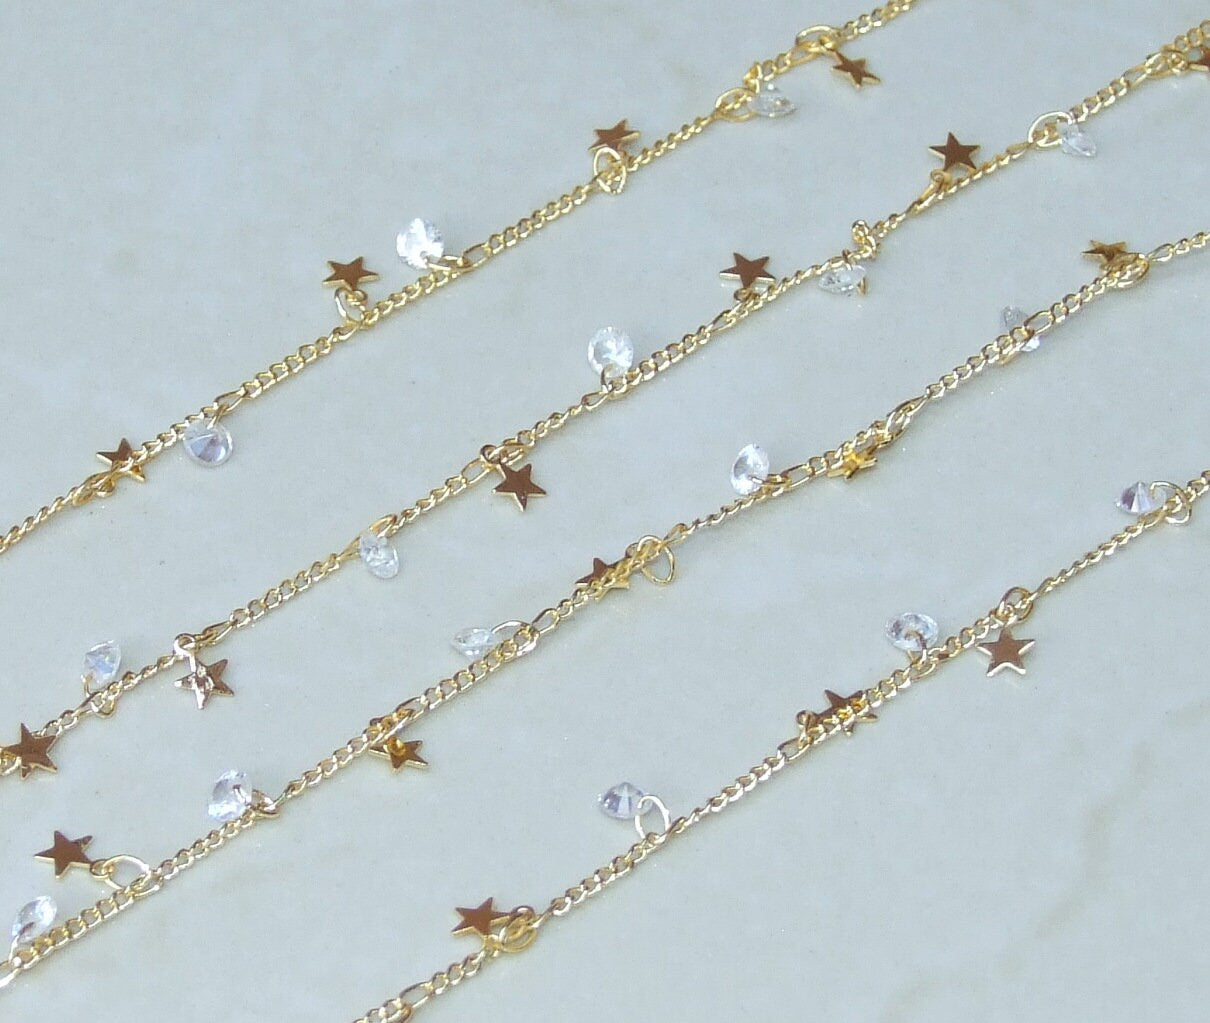 Small Star Crystal Drop Chain, by the Foot, Rosary Chain with Beads, Rosary Chain Wholesale, Rosary Chain Bulk, Rosary Chain, Jewelry Chain